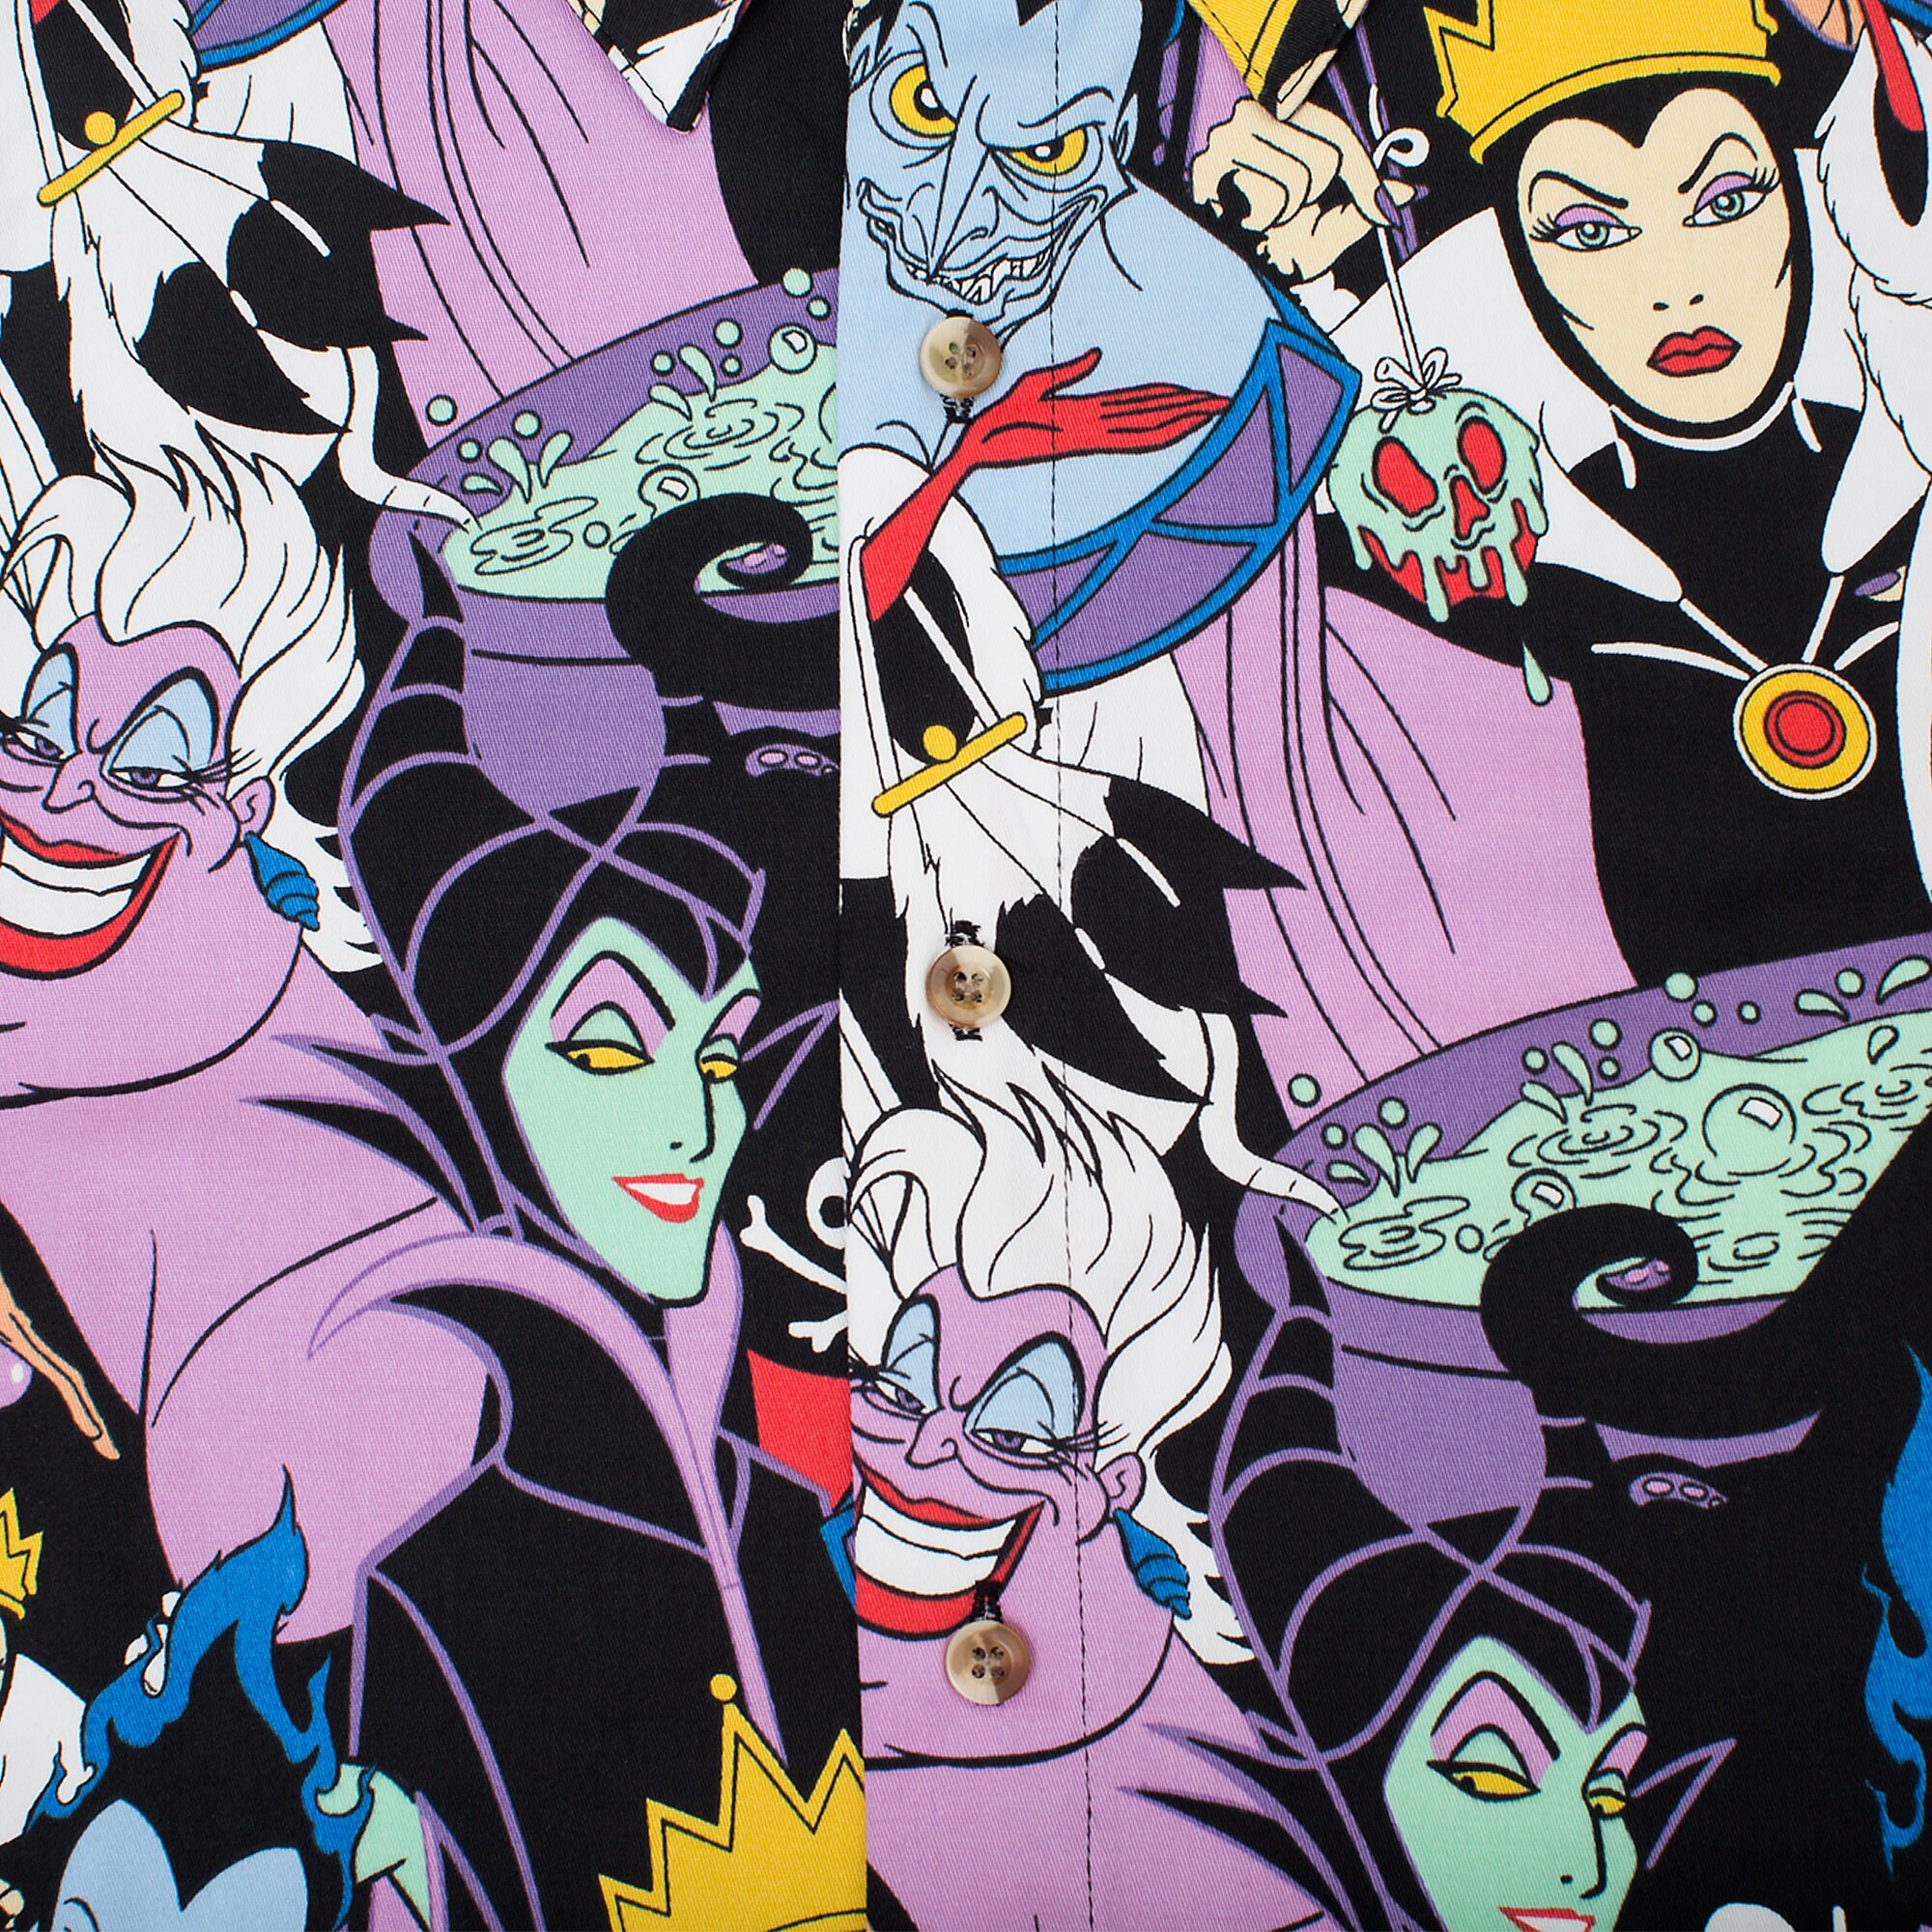 Disney Villains Button-Up Shirt for Adults by Cakeworthy